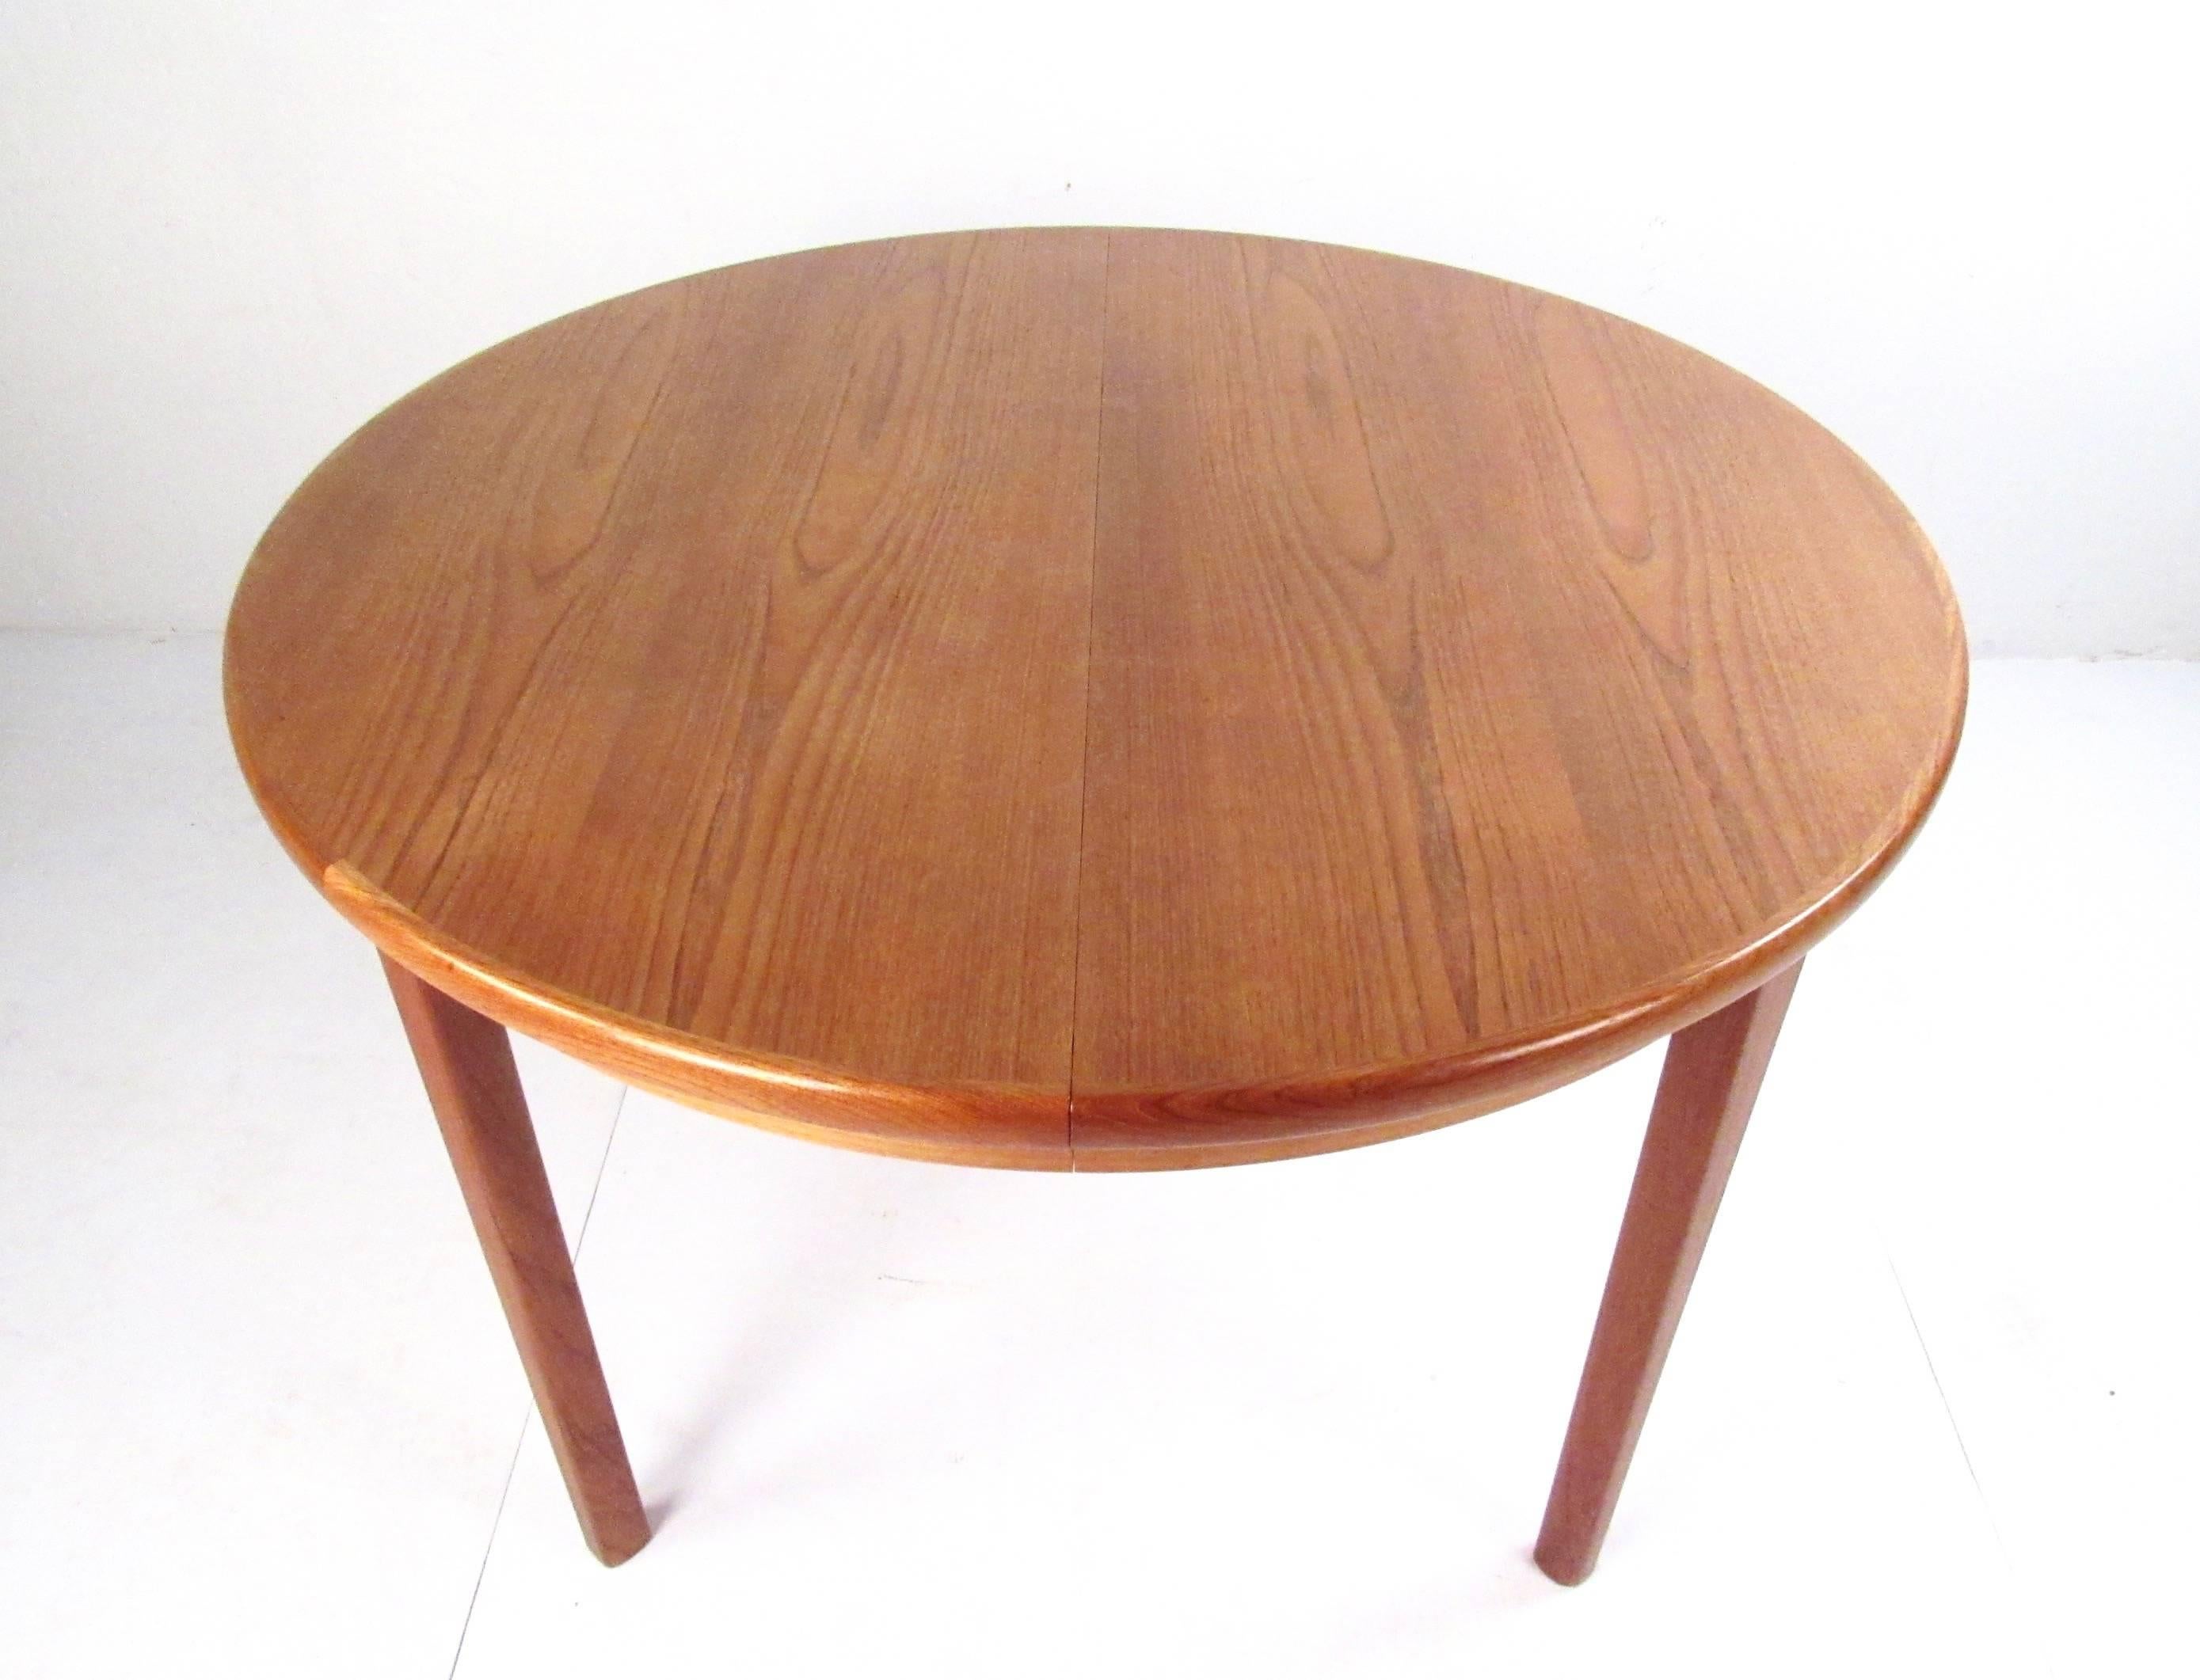 This stylish modern teak table makes a versatile addition to kitchen or dining room, features rich Danish teak wood grain and expandable design. Opening from a circular 46.5 inch table to 86 inches wide, it's easy to accommodate place settings for